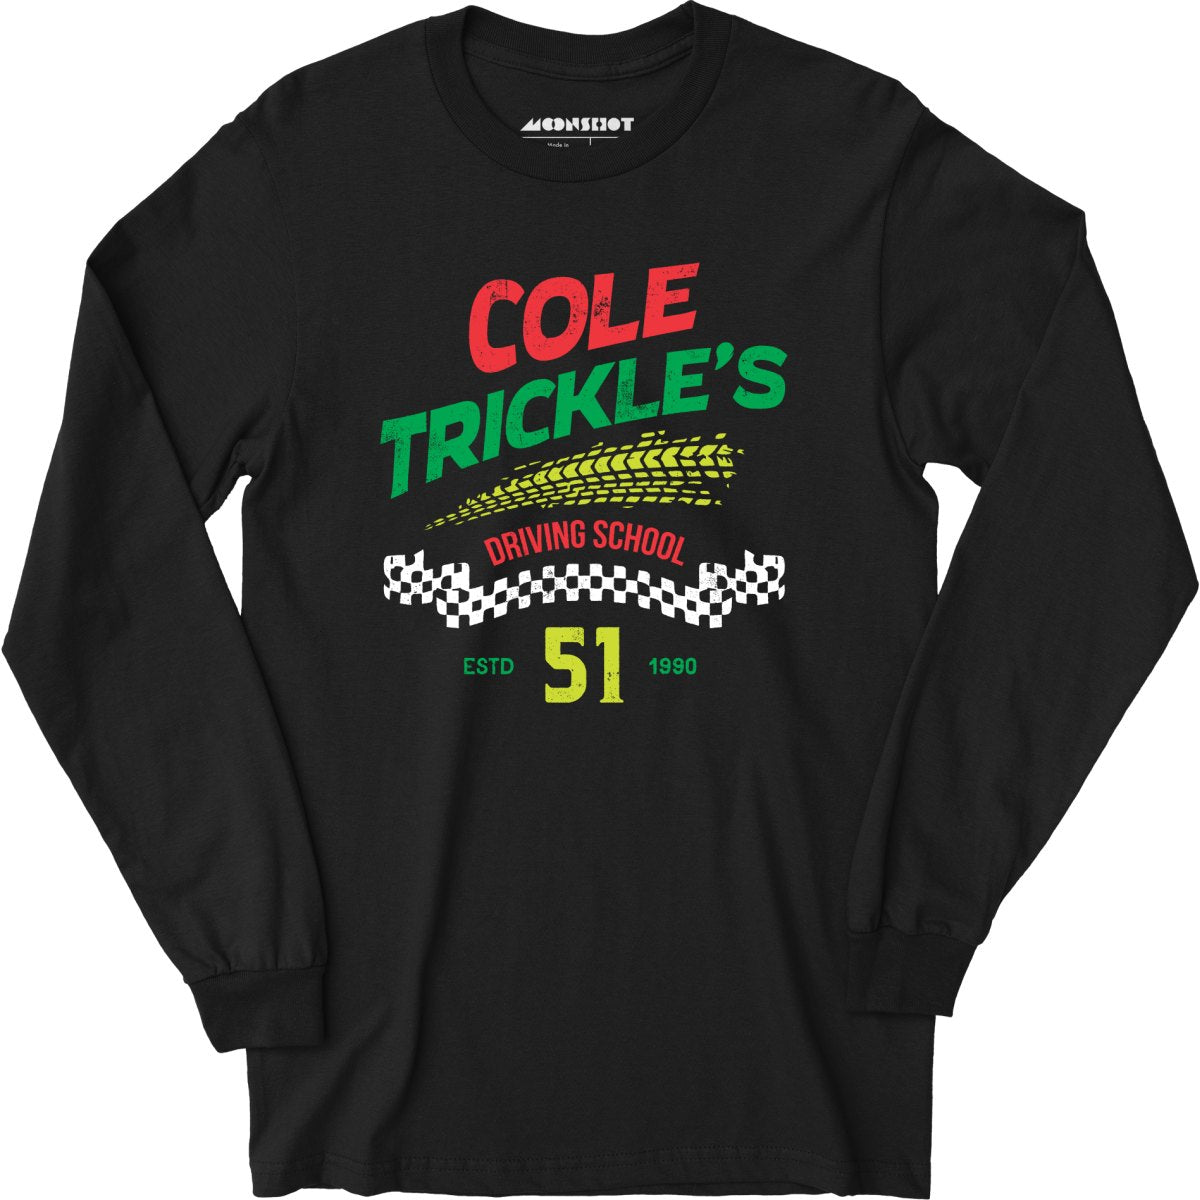 Cole Trickle's Driving School - Long Sleeve T-Shirt